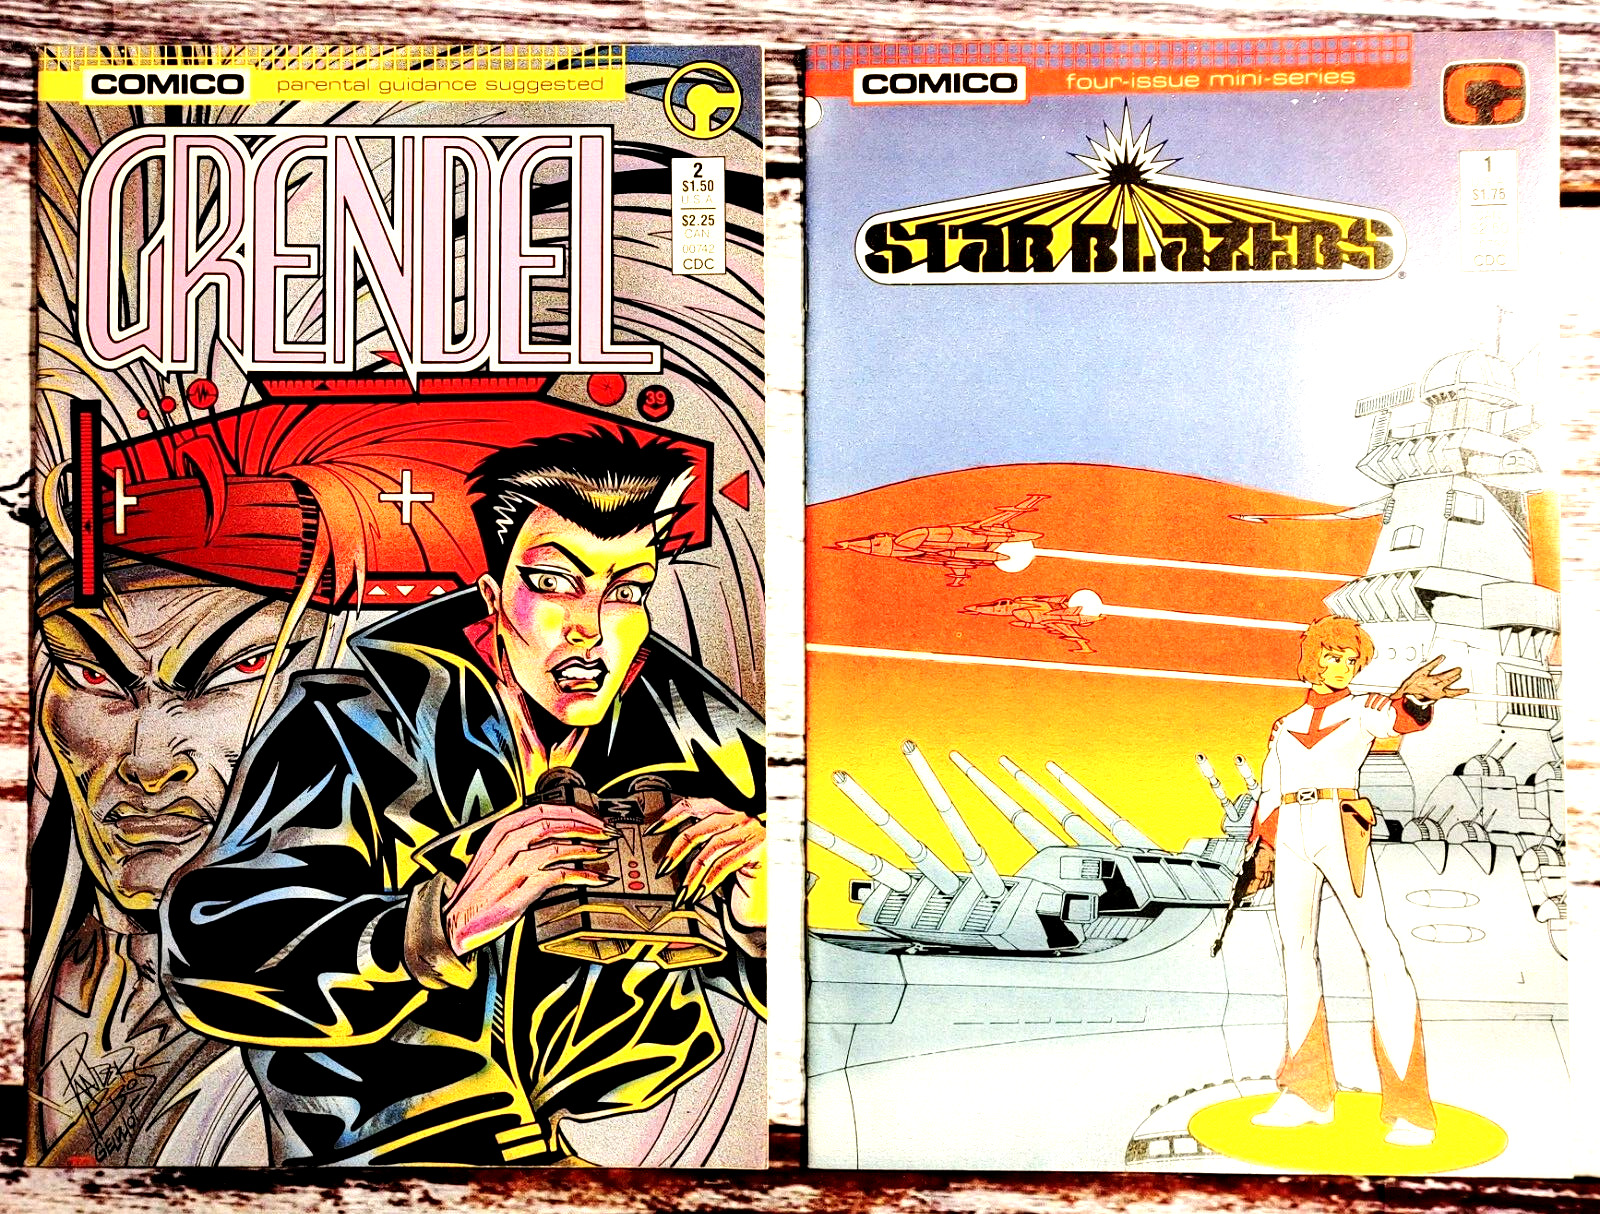 Lot of 2 Comico Titled Comics. Grendel #2, 1986 and Star Blazers #1, 1987.